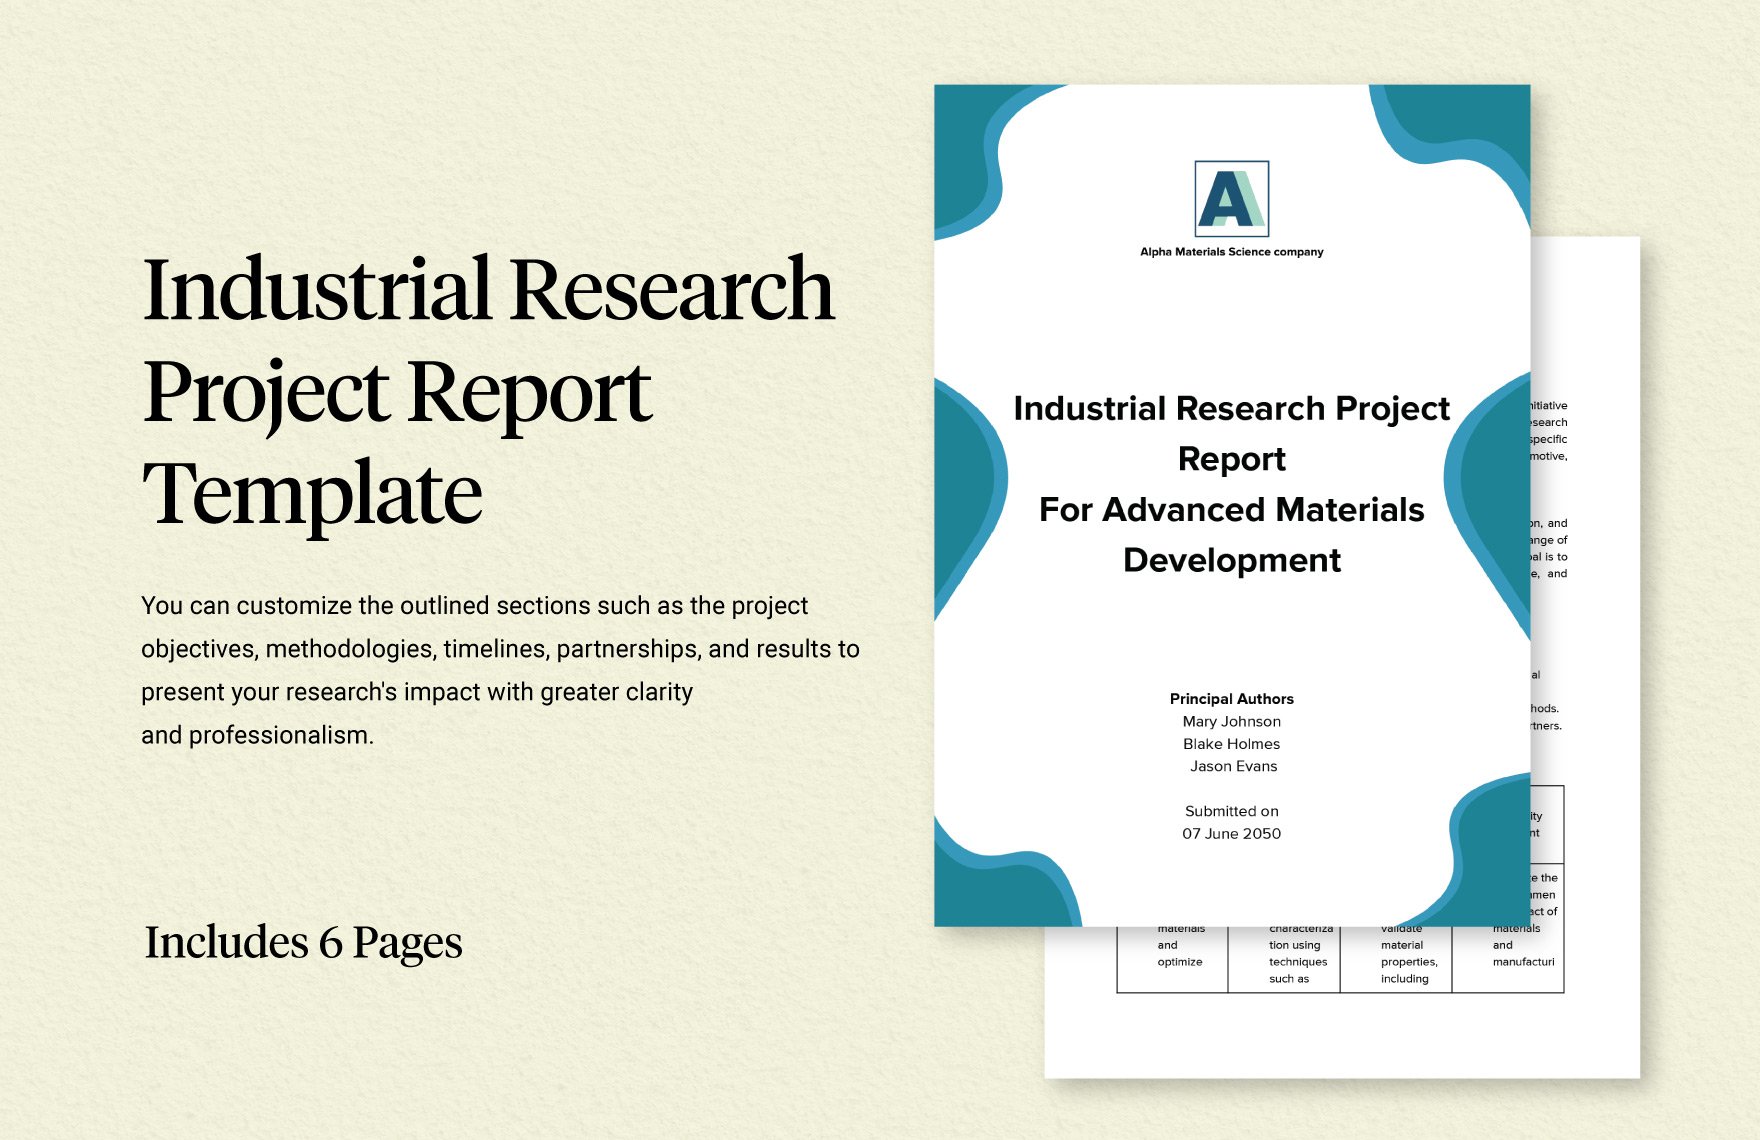 Industrial Research Project Report Template